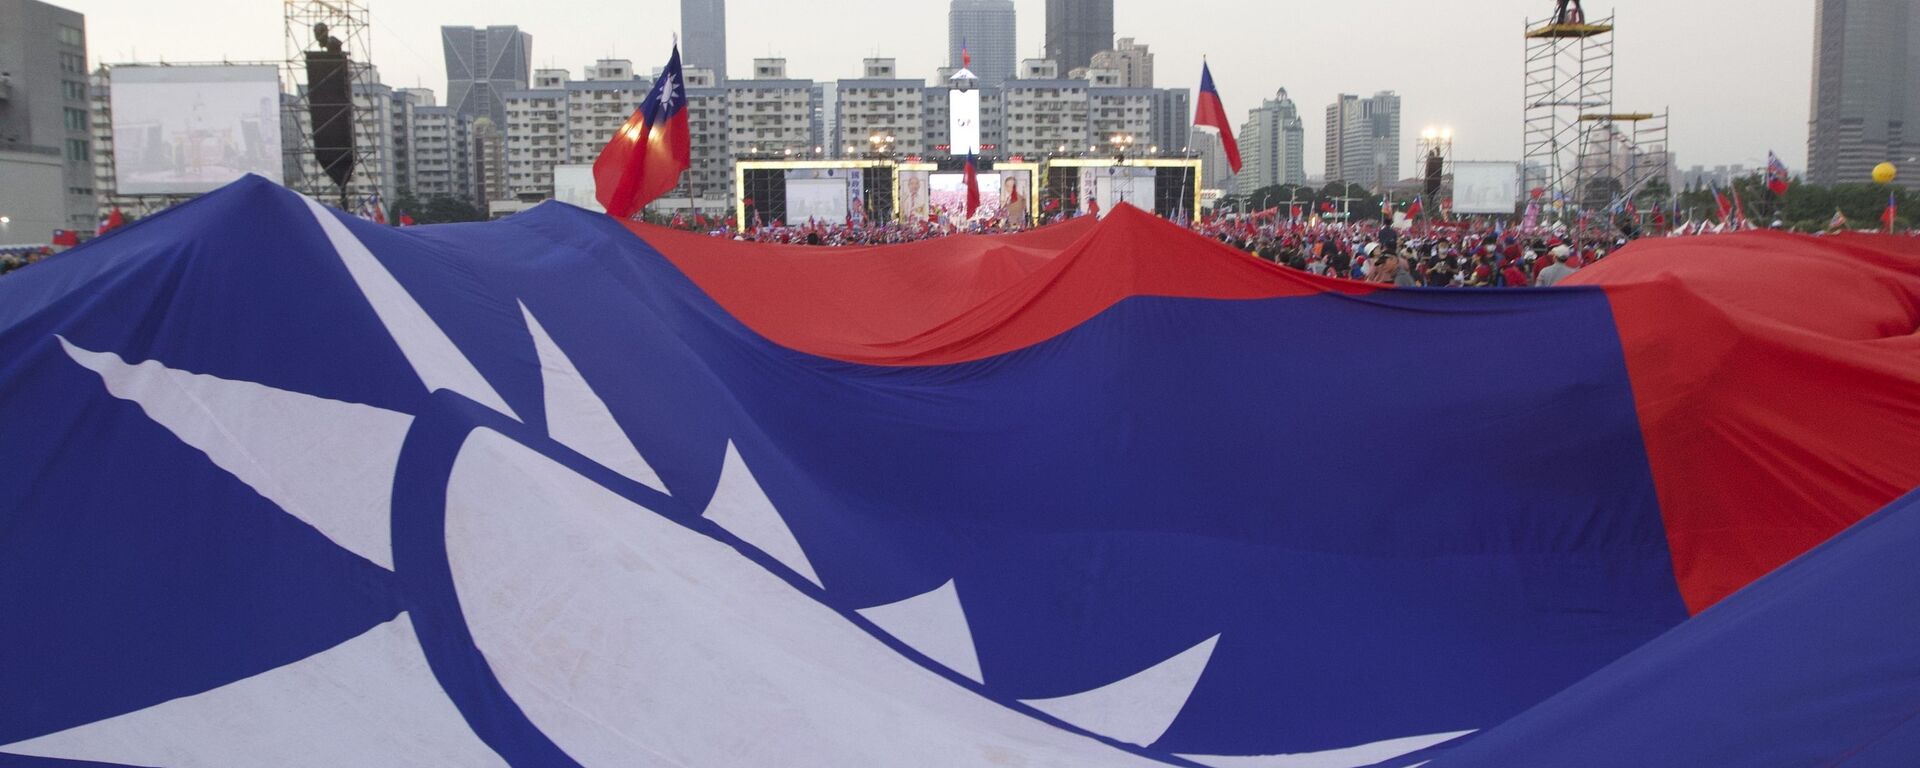 Supporters of Taiwan's 2020 presidential election candidate for the KMT, or Nationalist Party, Han Kuo-yu pass along a giant Taiwanese flag for the start of a campaign rally in southern Taiwan's Kaohsiung city on Friday, Jan 10, 2020 - Sputnik International, 1920, 01.05.2022